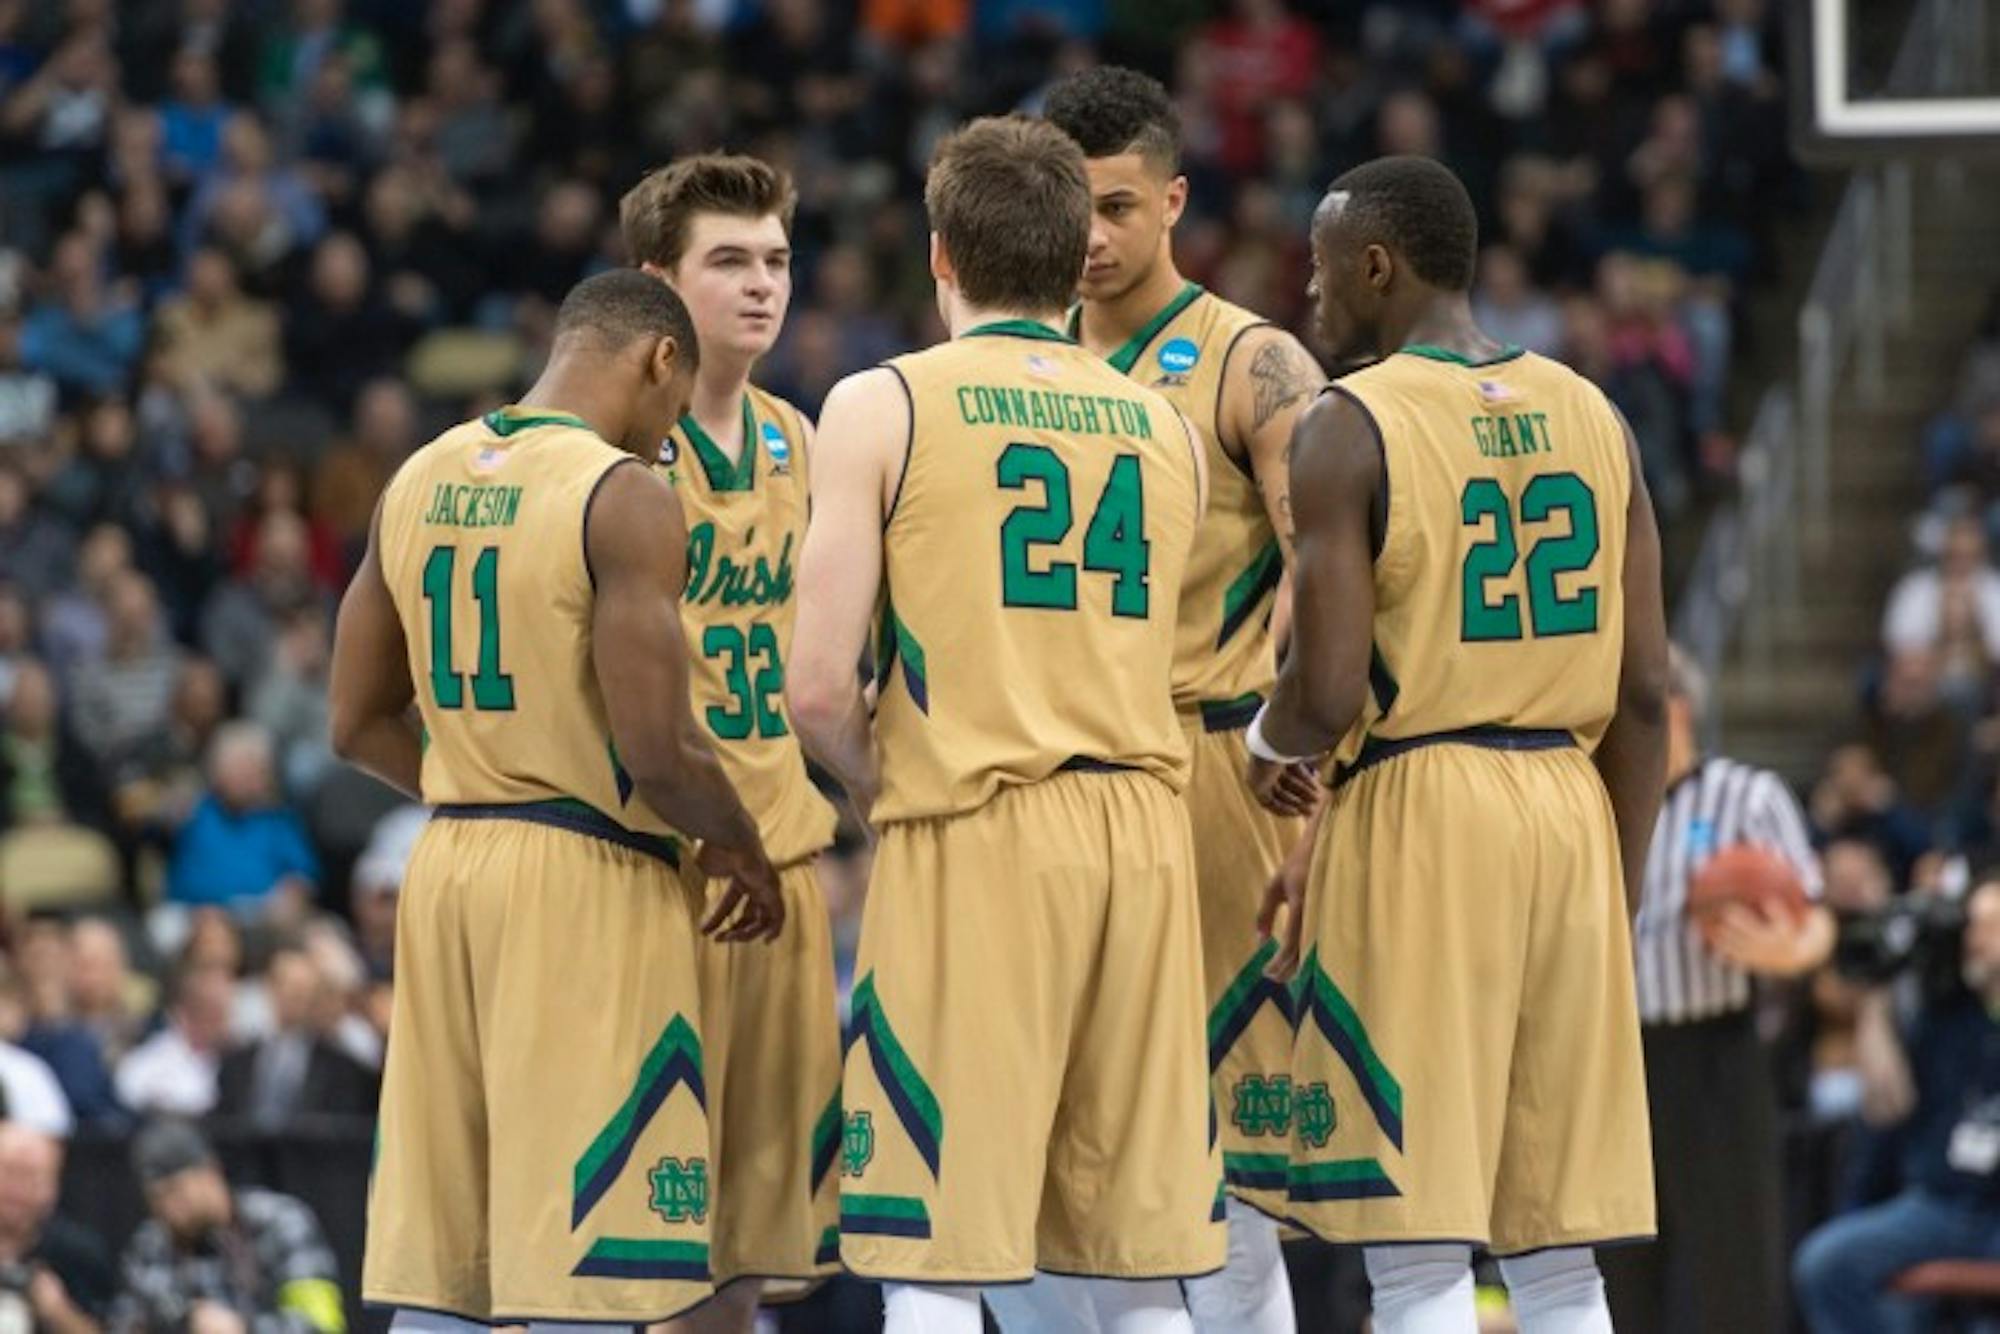 The Irish starters — from left , sophomores Demetrius Jackson and Steve Vasturia, senior Pat Connaughton, junior Zach Auguste and senior Jerian Grant — huddle March 19 during a 69-65 win over Northeastern.